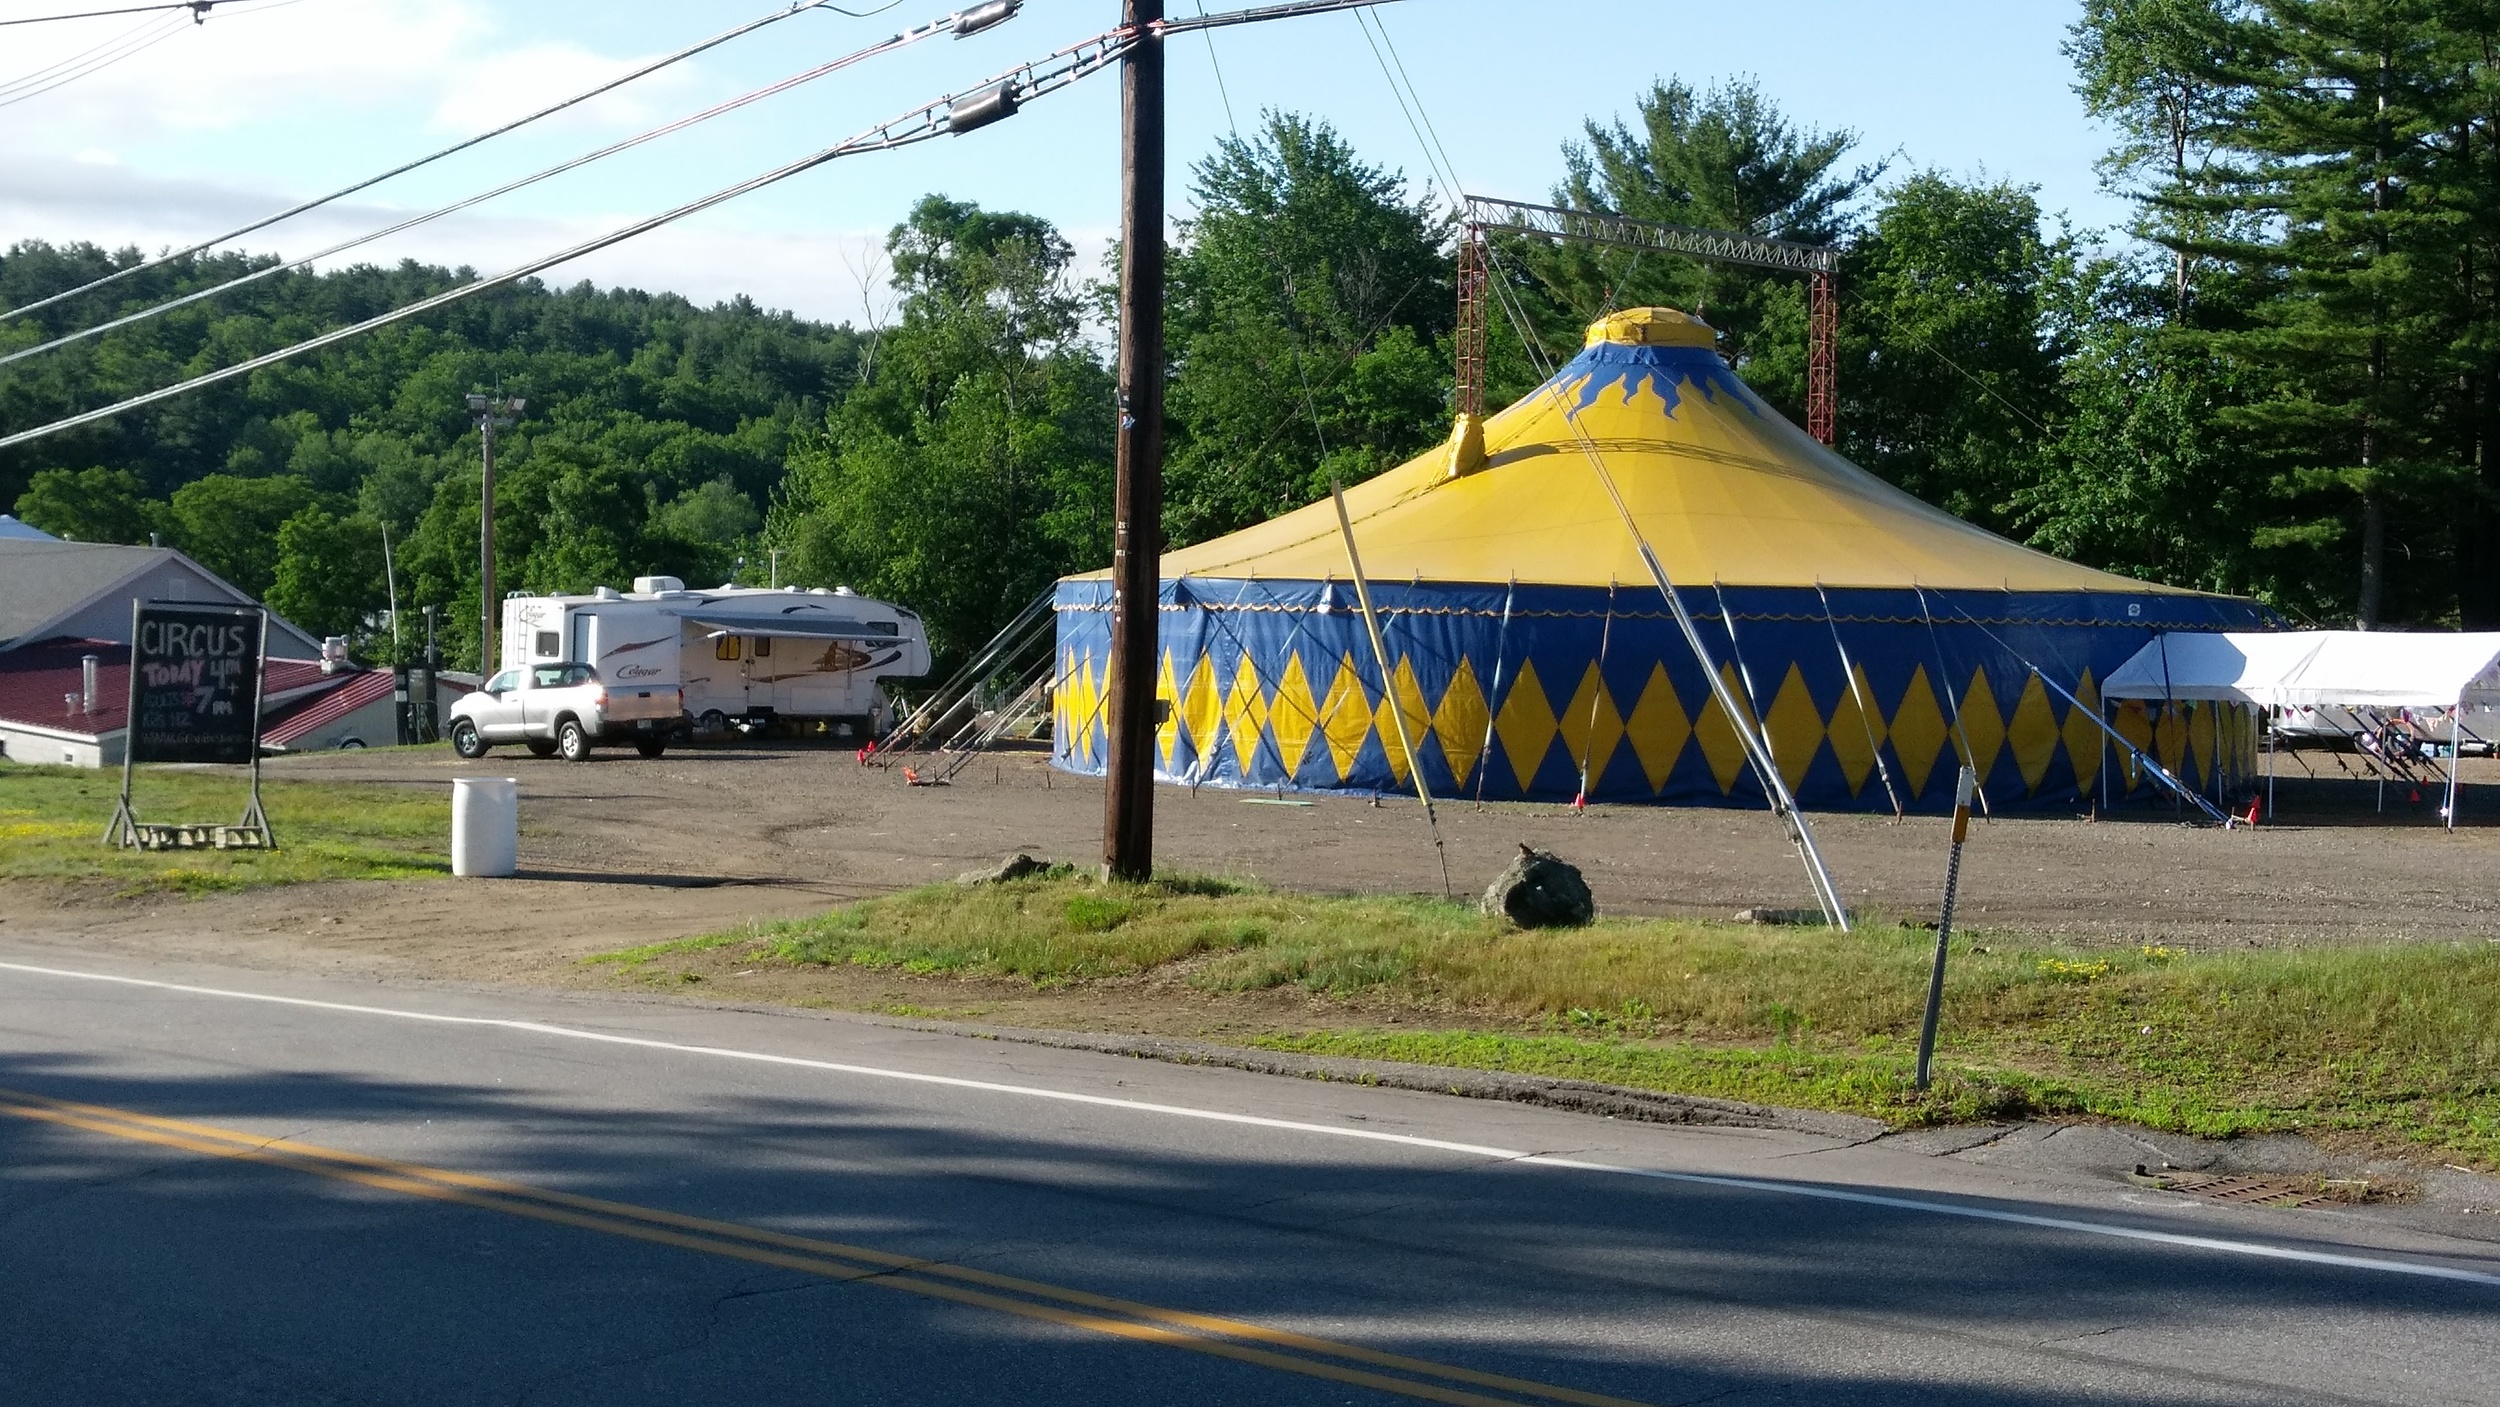 The creapiest circus I've ever seen